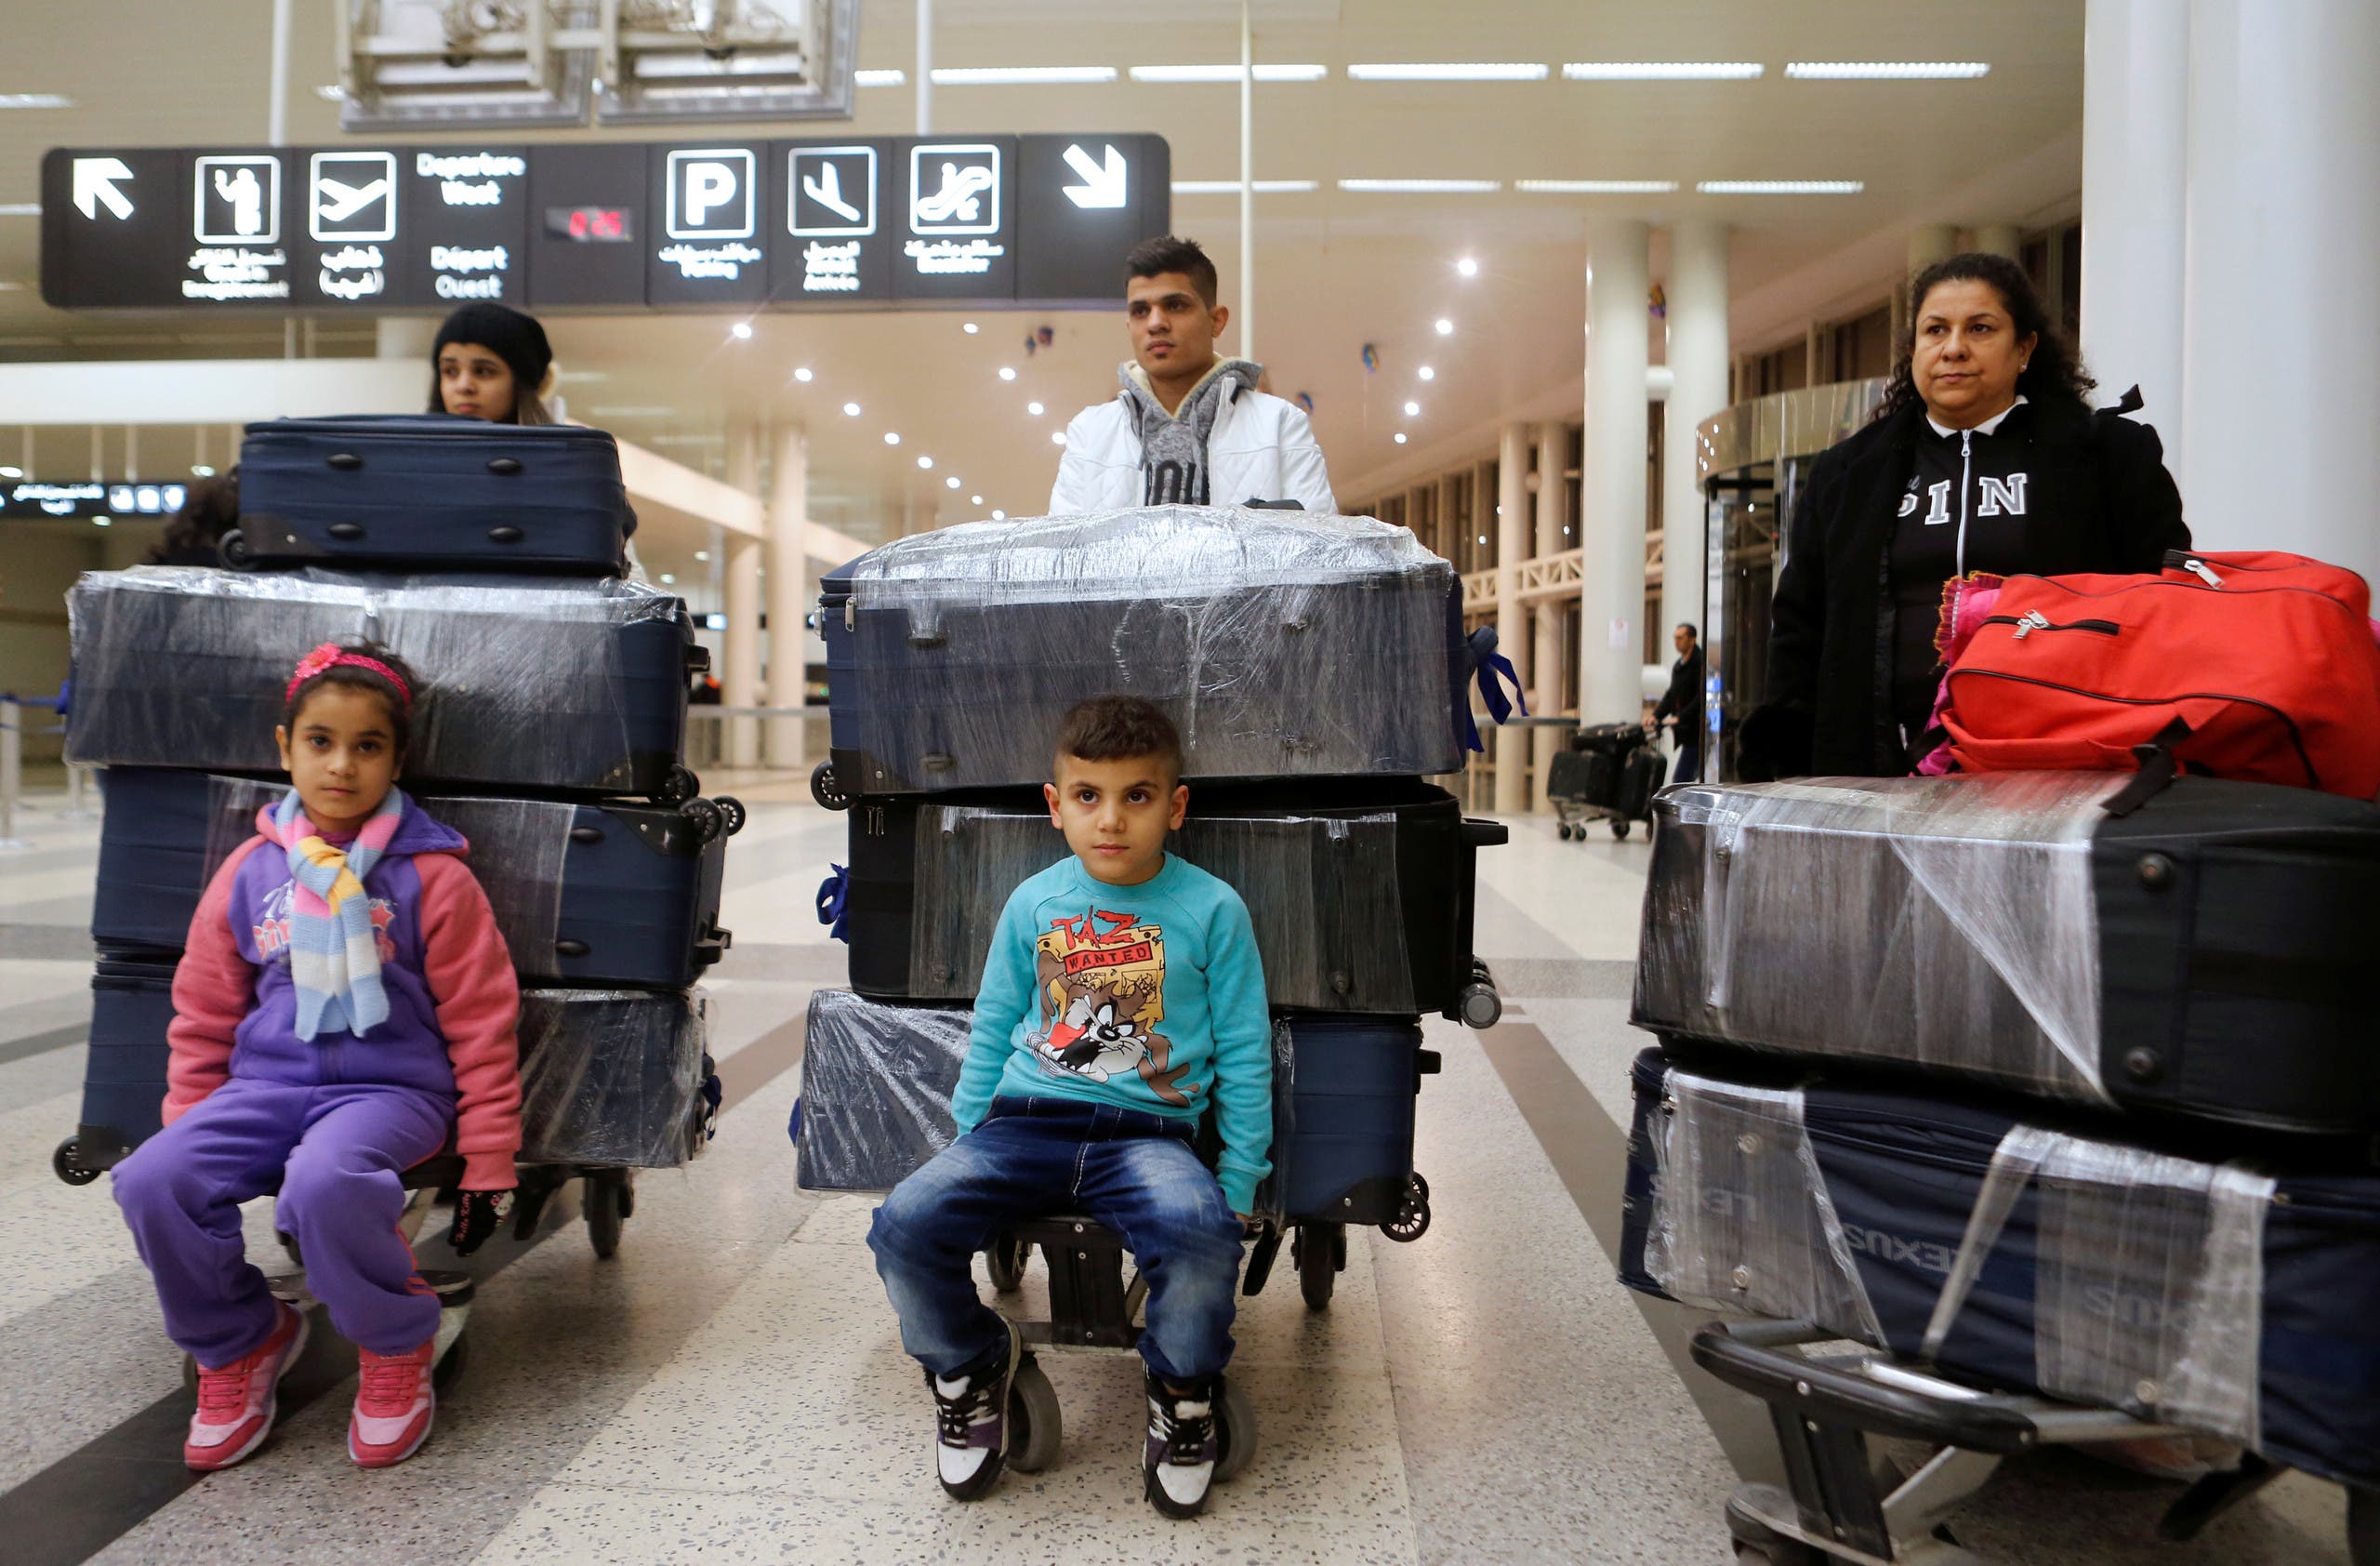 The al-Qassab family, Iraqi Christian refugees from Mosul, pose with their luggage at Beirut international airport ahead of their travel to the United States, Lebanon February 8, 2017. (Reuters/Mohamed Azakir)